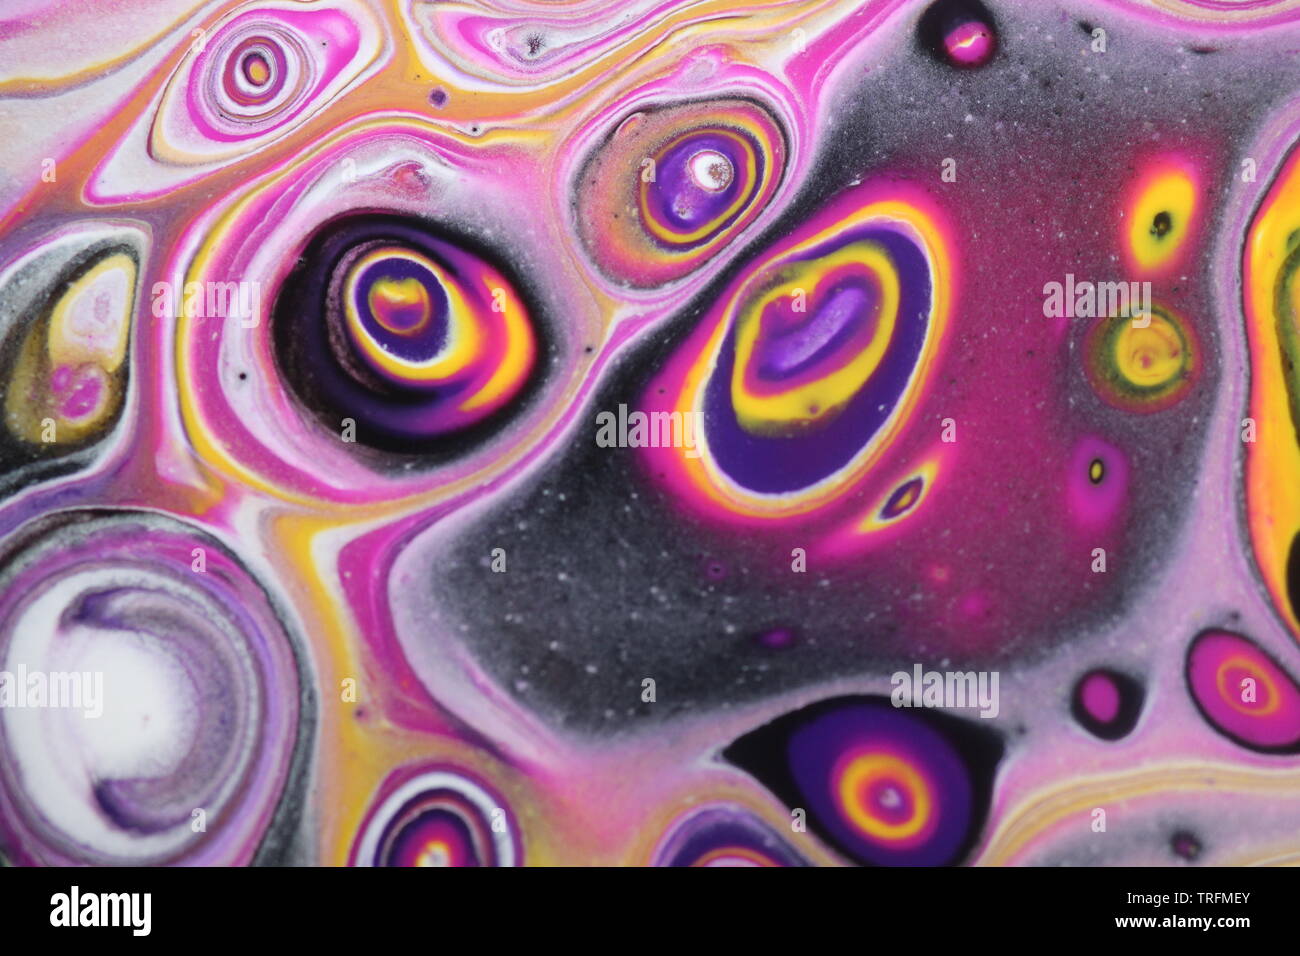 Background of a closeup of a psychedelic abstract acrylic pour painting that resembles space or an alien planet. Stock Photo